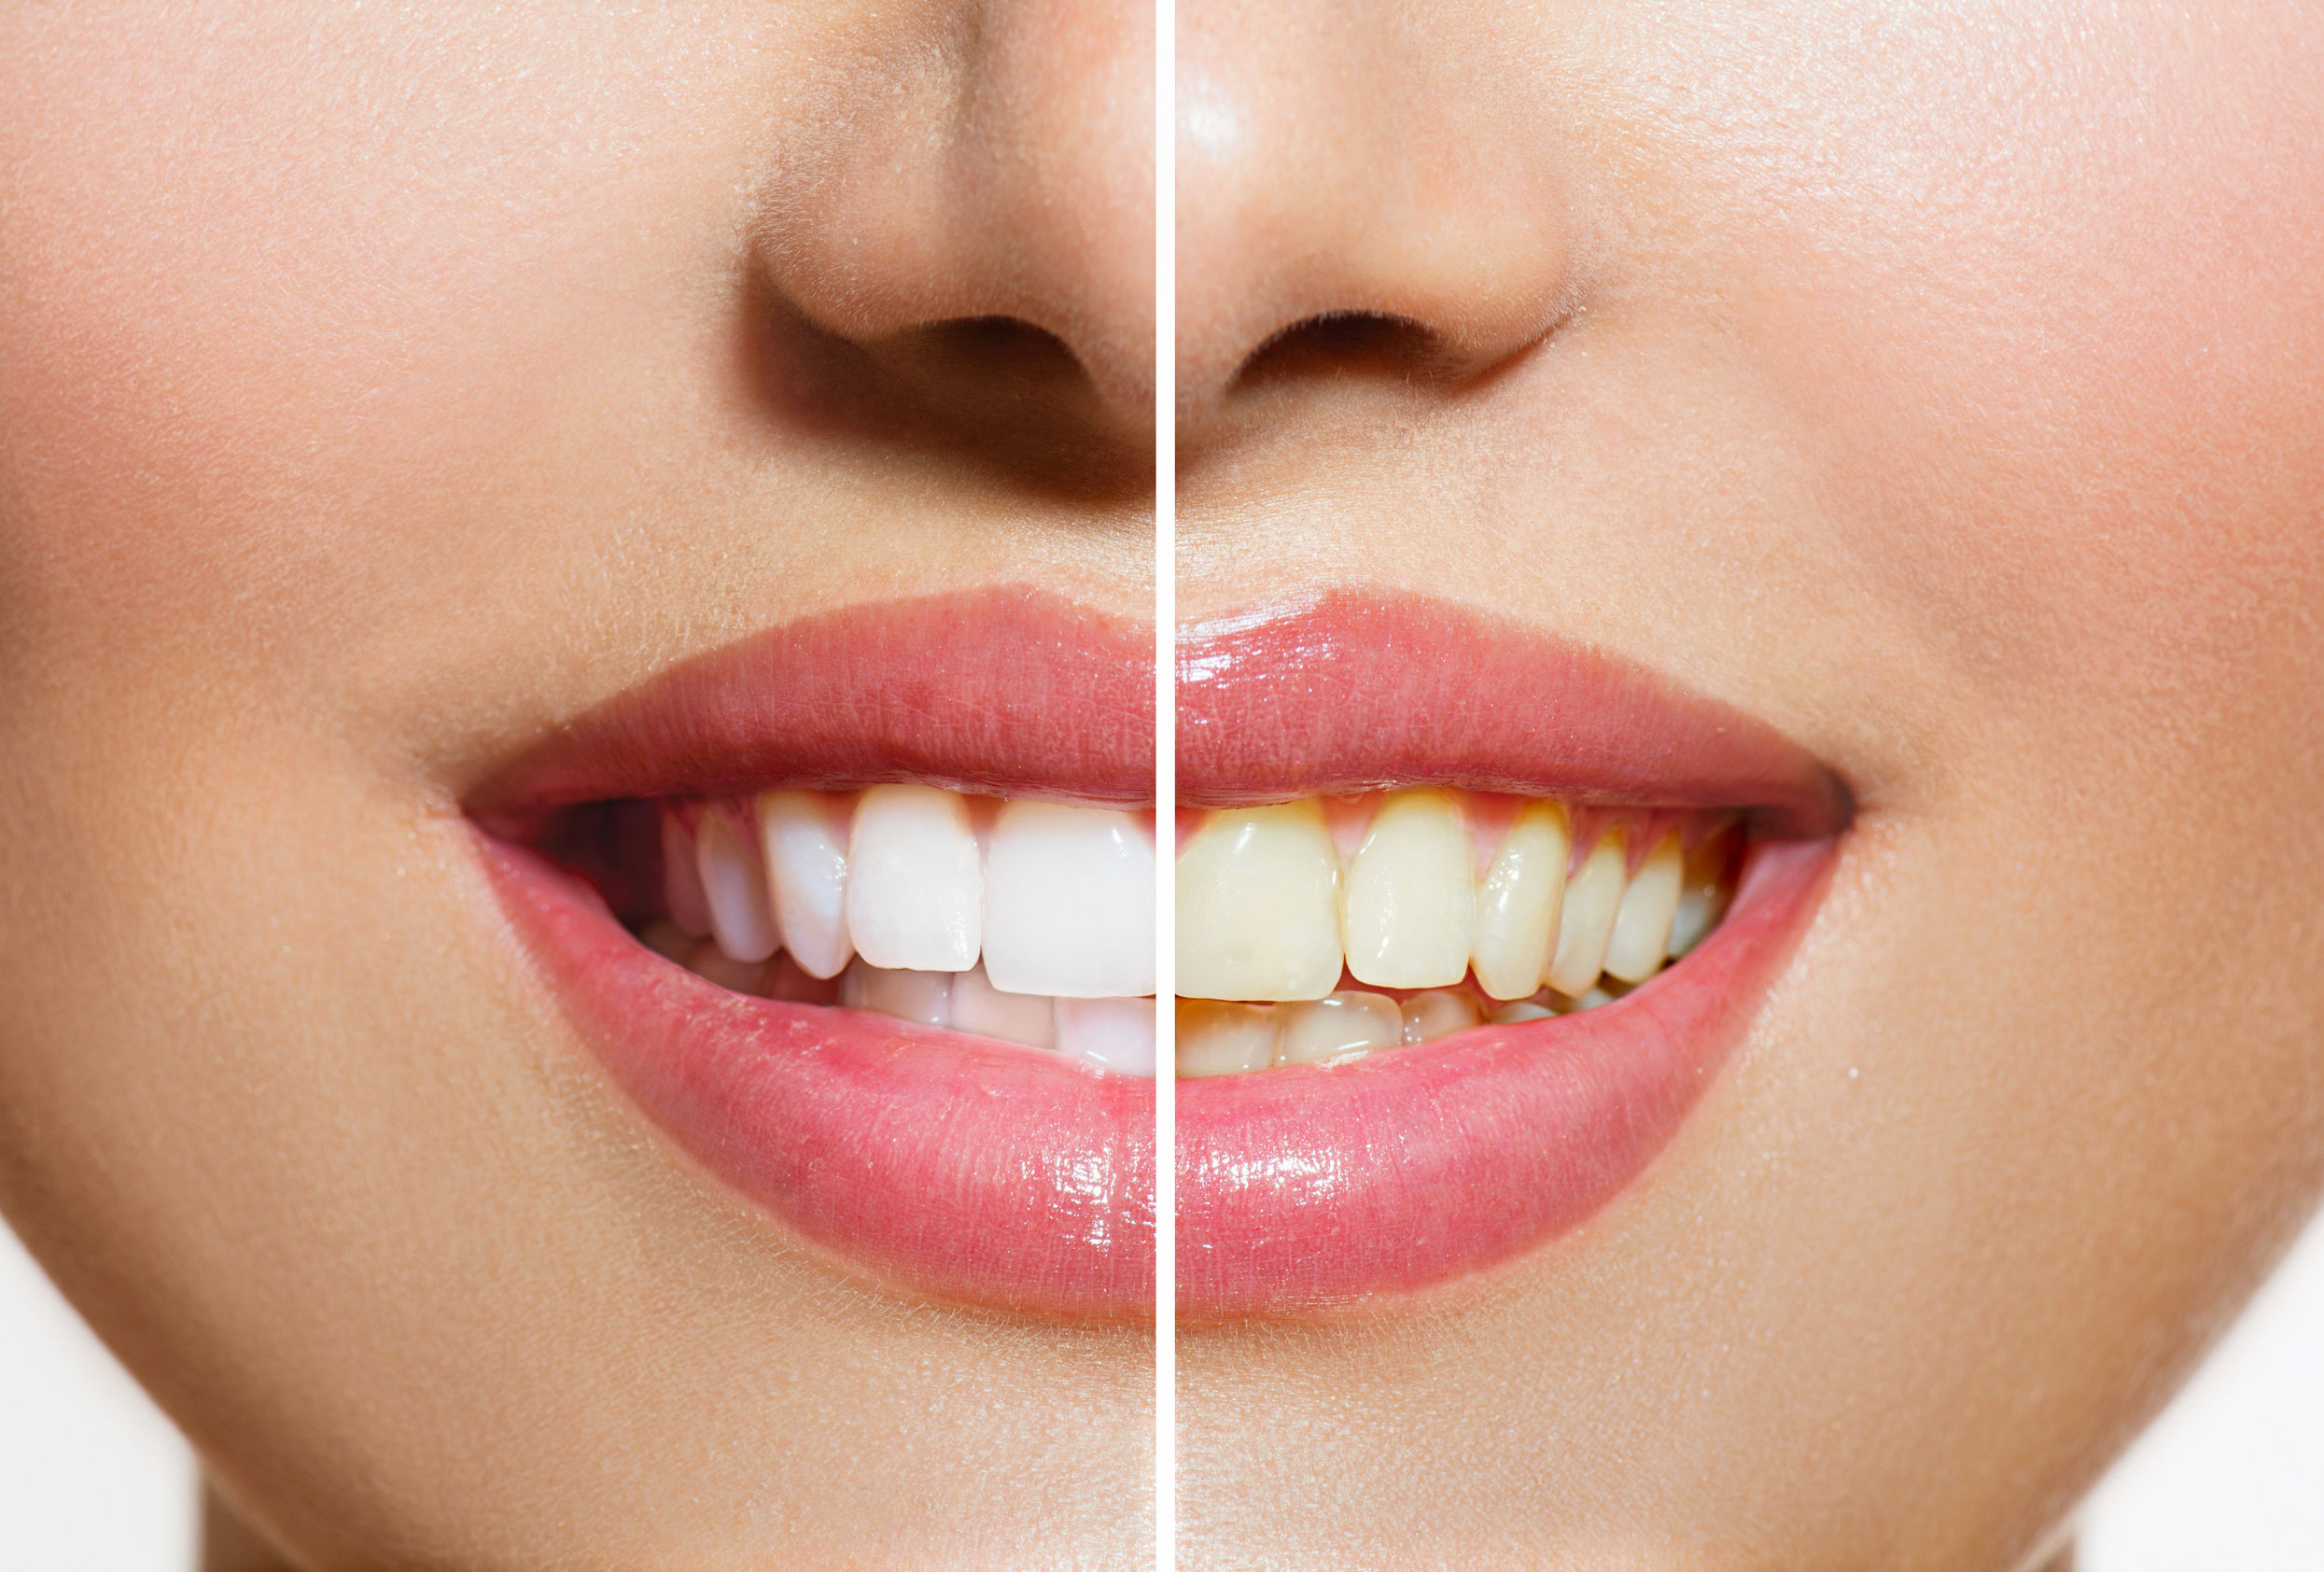 Where Can I Get Teeth Whitening In Baltimore?